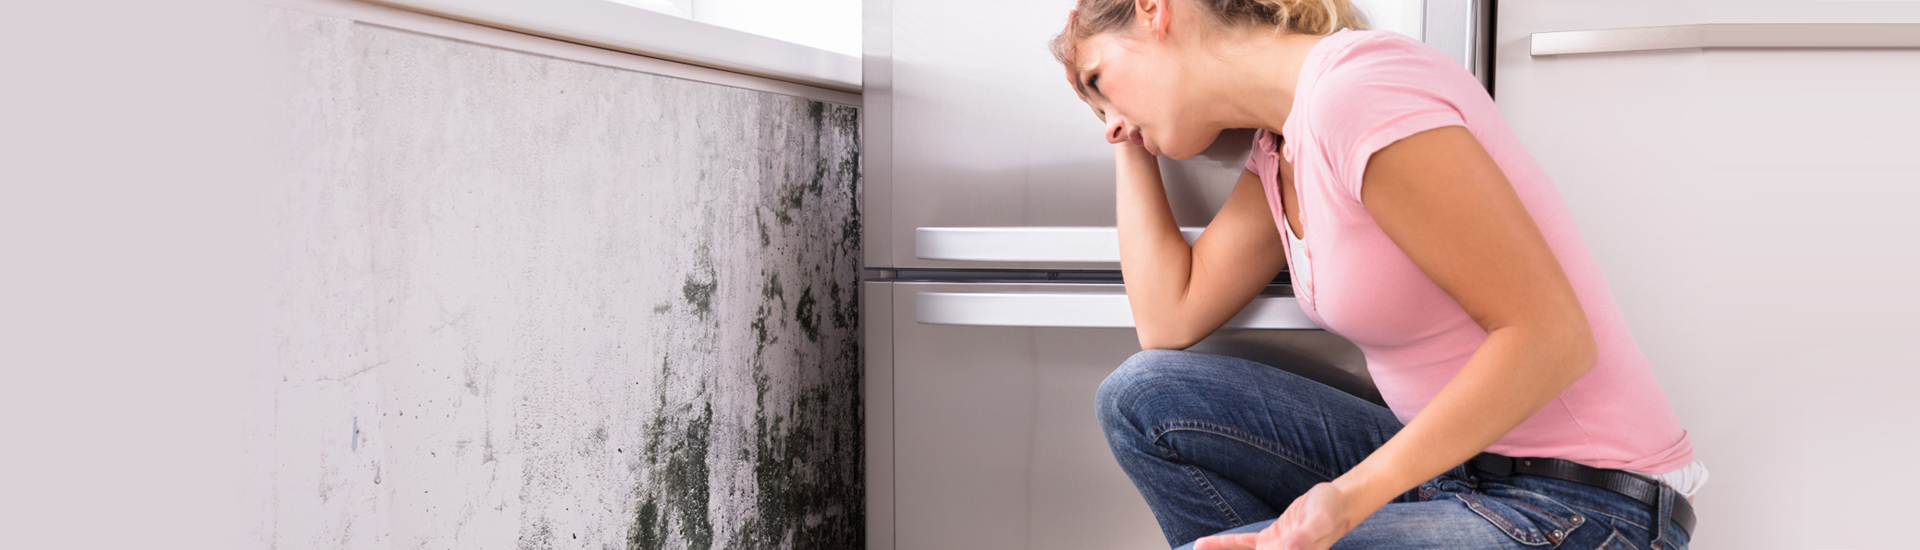 A New Medical Threat: Mold Toxicity